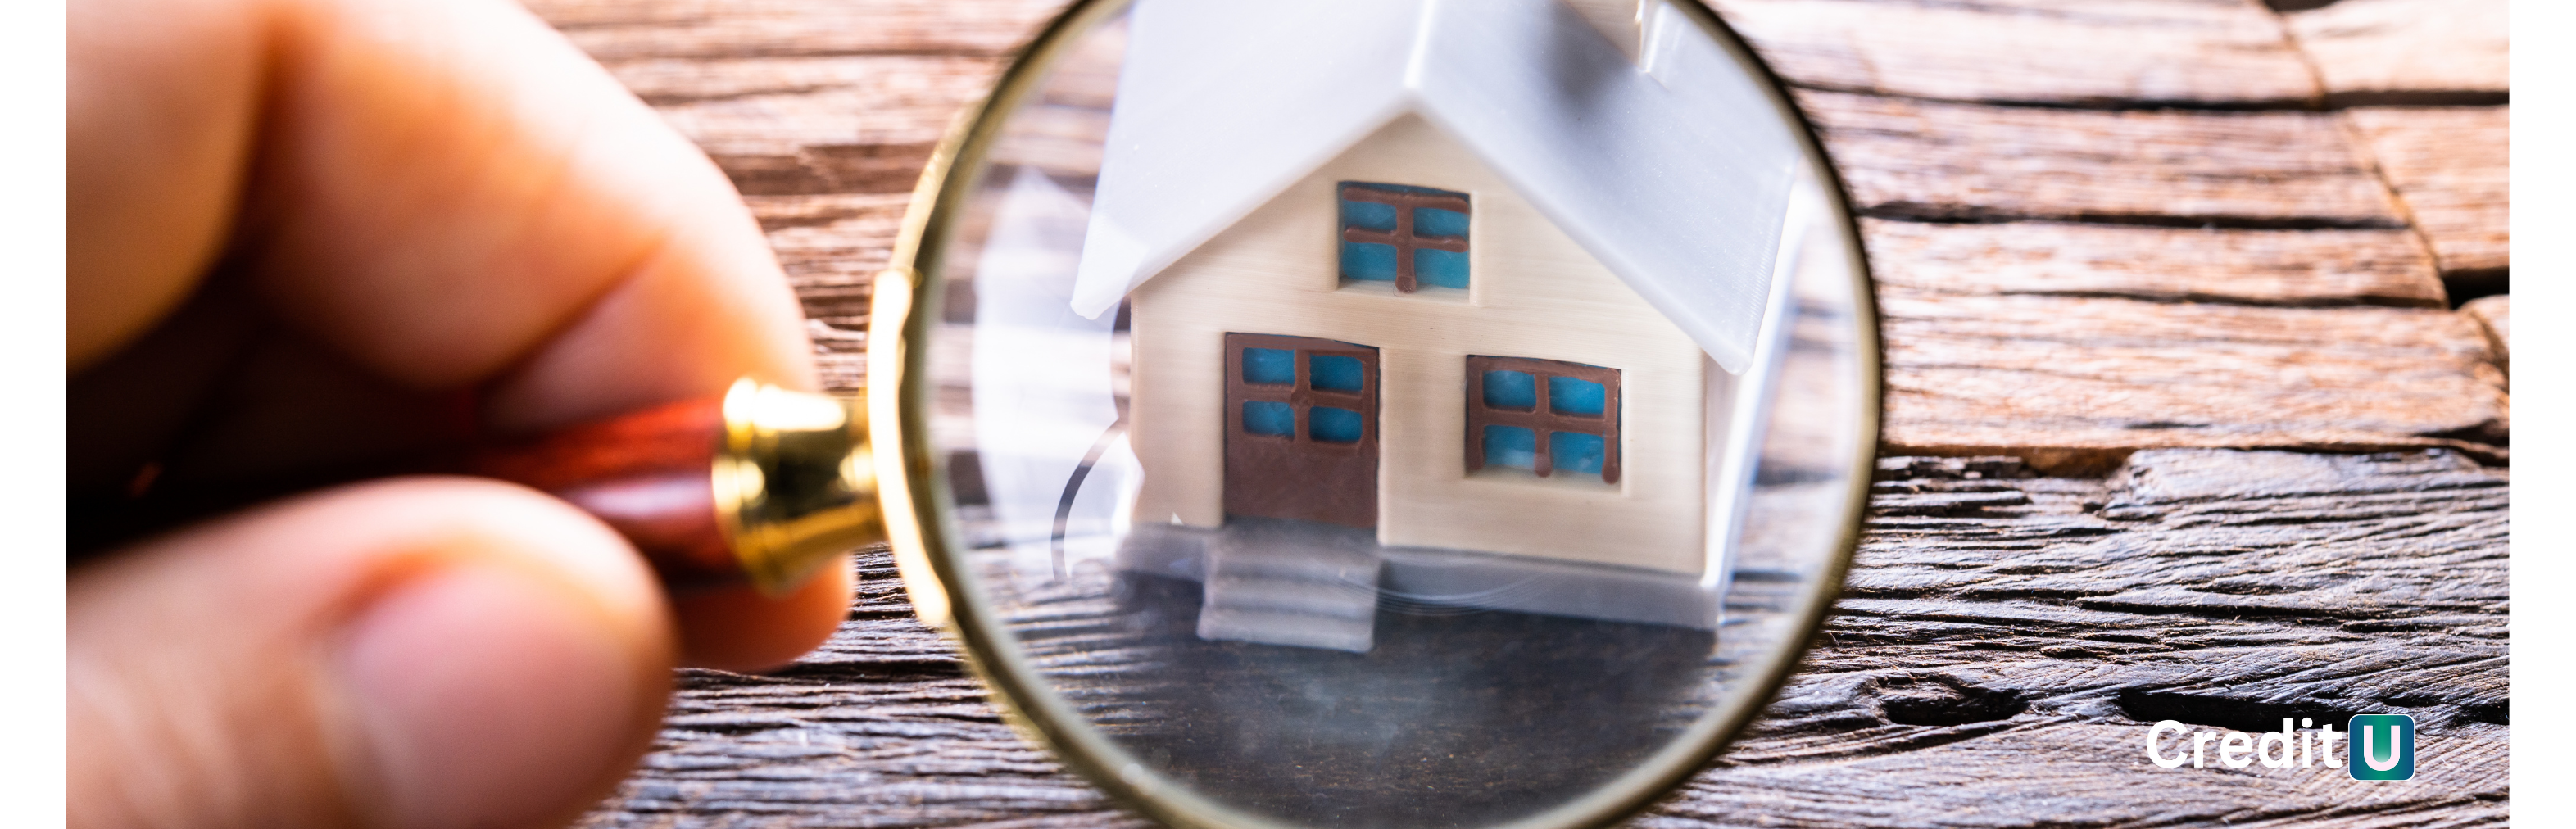 Home appraisal process is a key step in the homebuying process